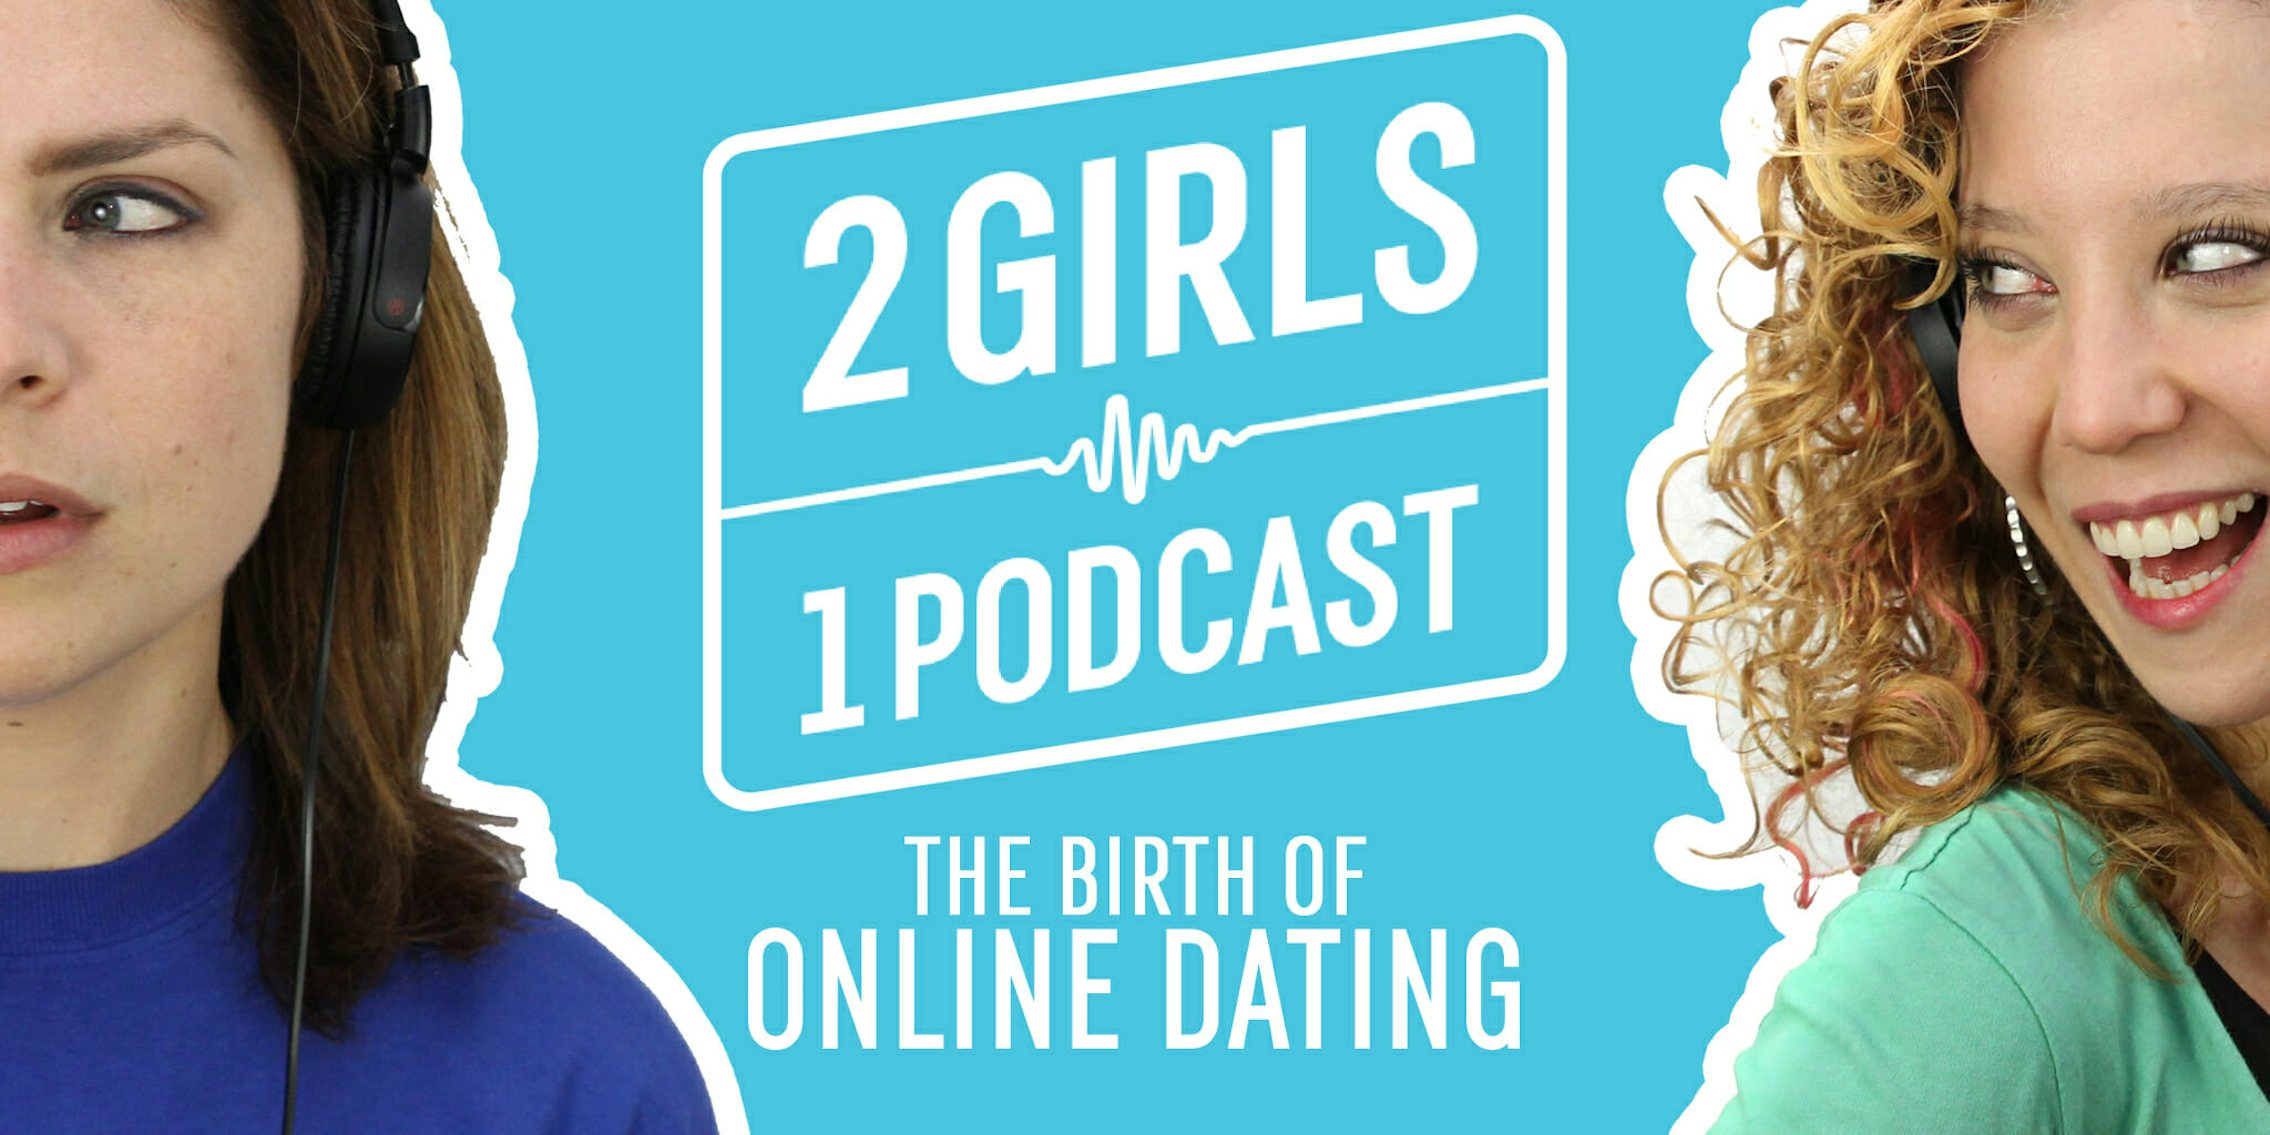 2 Girls 1 Podcast: Gary Kremen's Match.com and the Birth of Online Dating